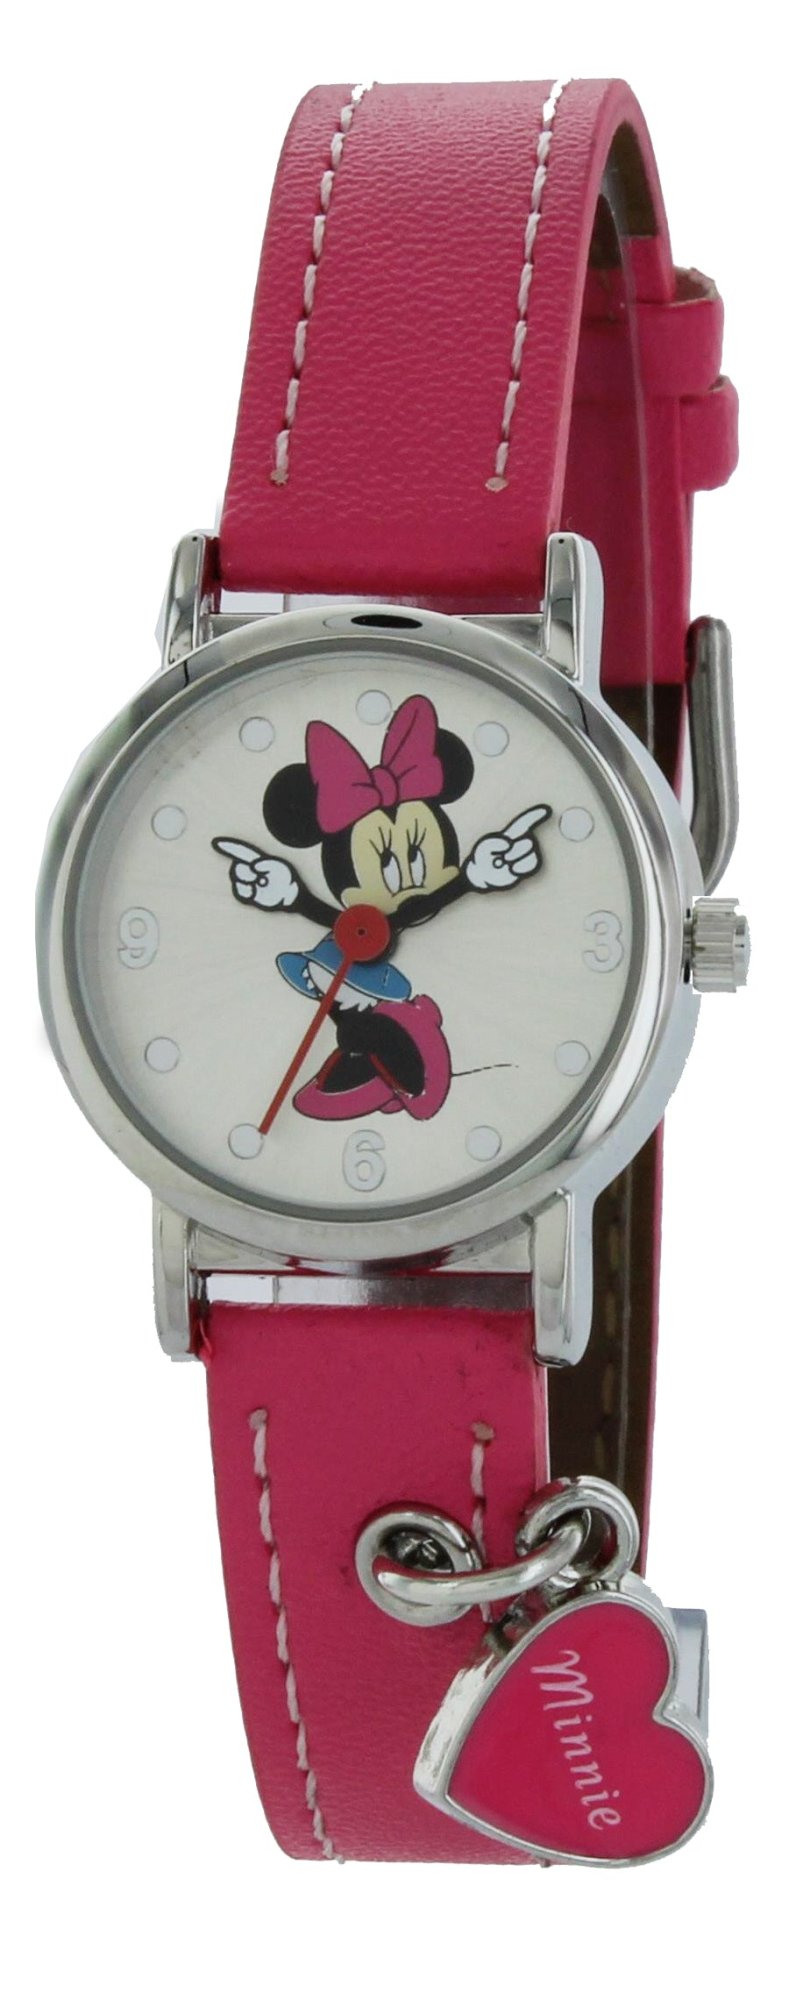 Model: Girls Disney Minnie Mouse Watch with Pink Strap and Heart Charm